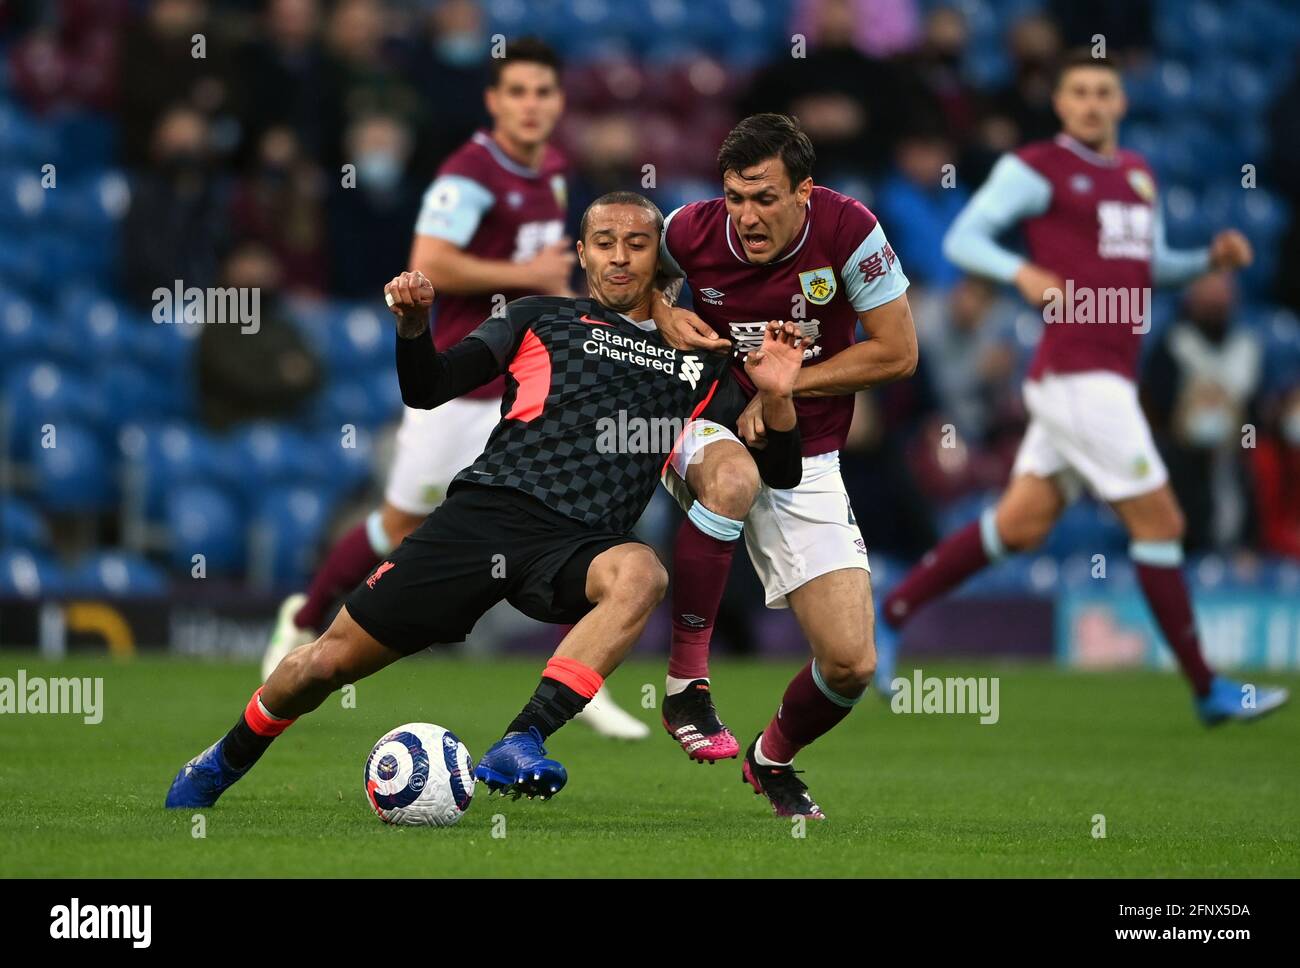 Liverpool's Thiago Alcantara (left) and Burnley's Jack Cork (right) battle for the ball during the Premier League match at Turf Moor, Burnley. Picture date: Wednesday May 19, 2021. Stock Photo